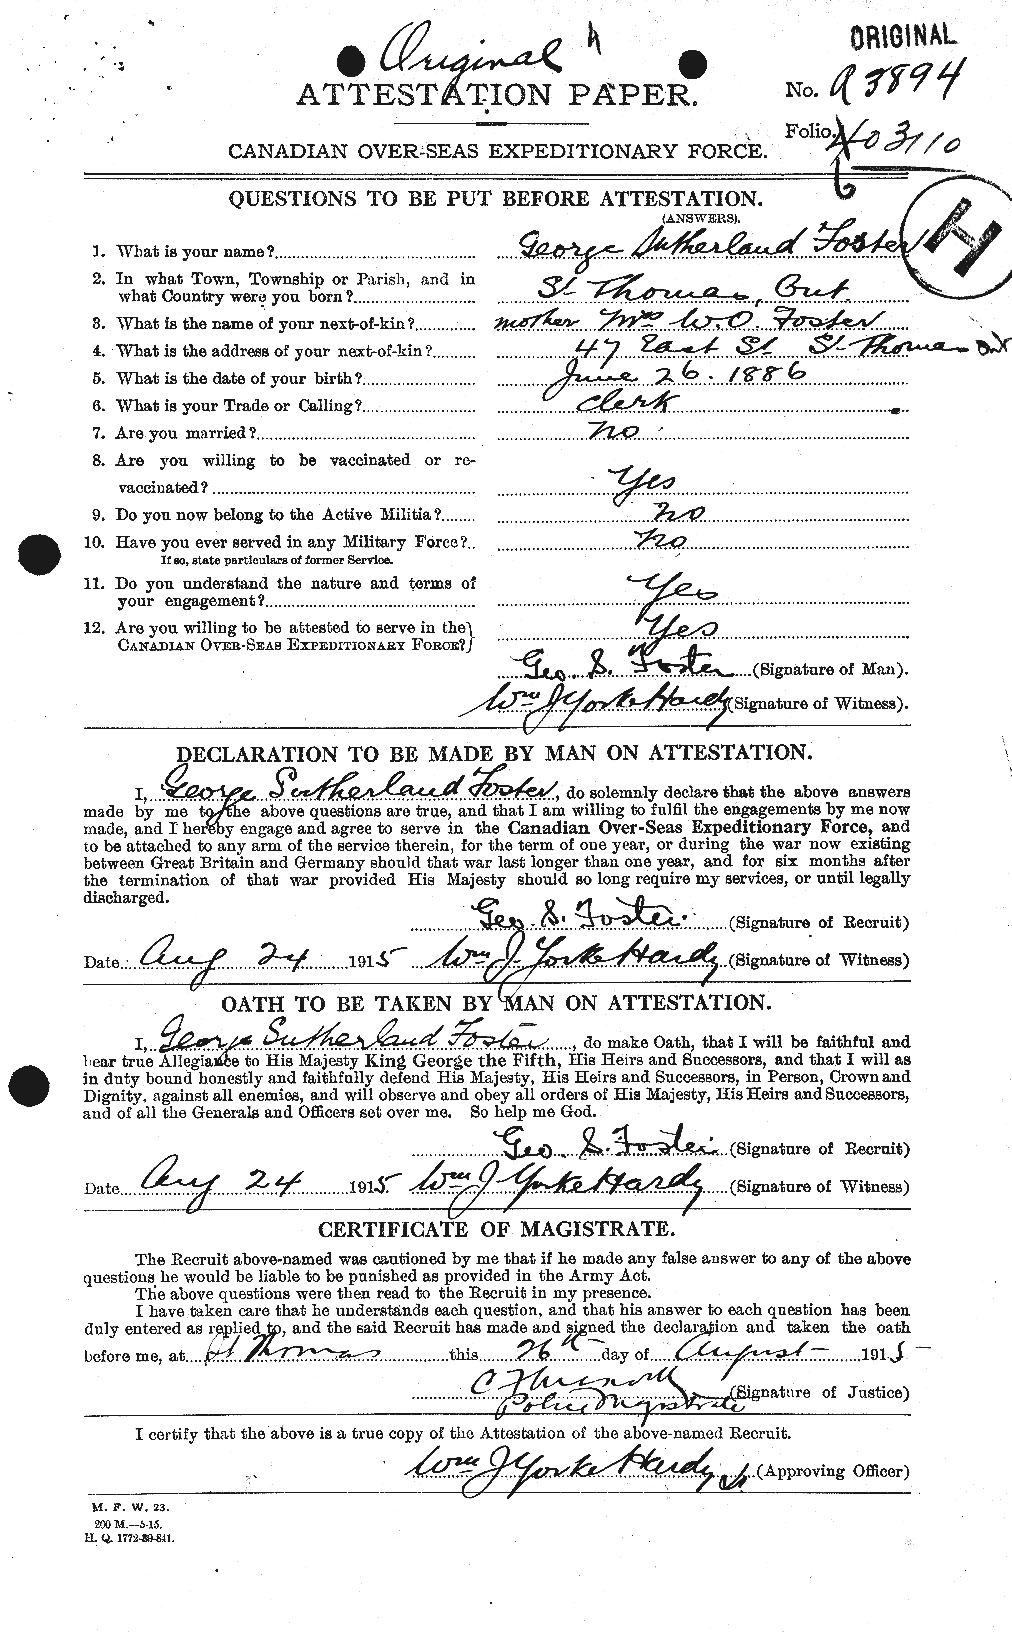 Personnel Records of the First World War - CEF 330701a